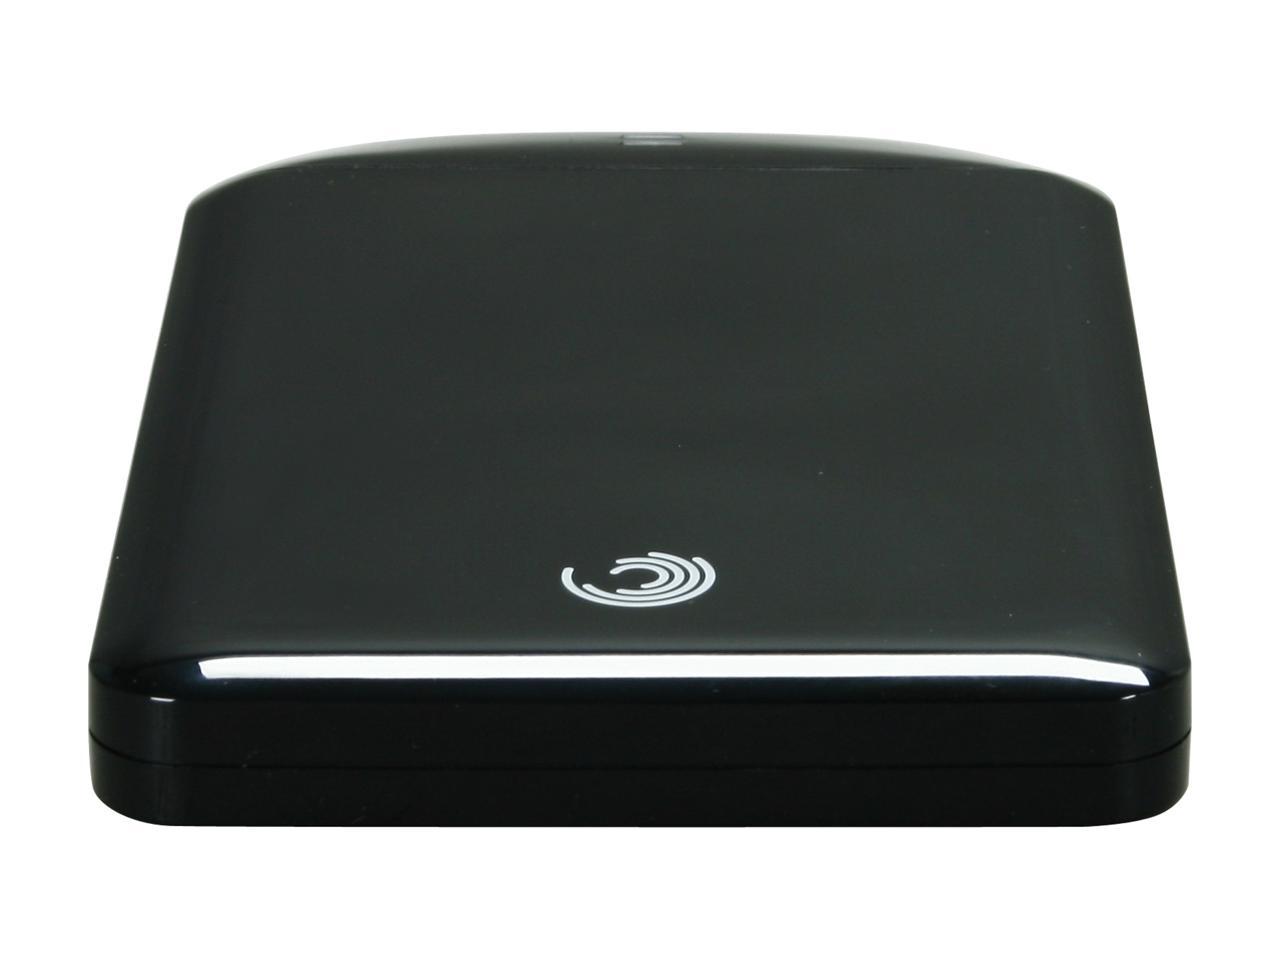 seagate freeagent goflex not recognized by windows 7